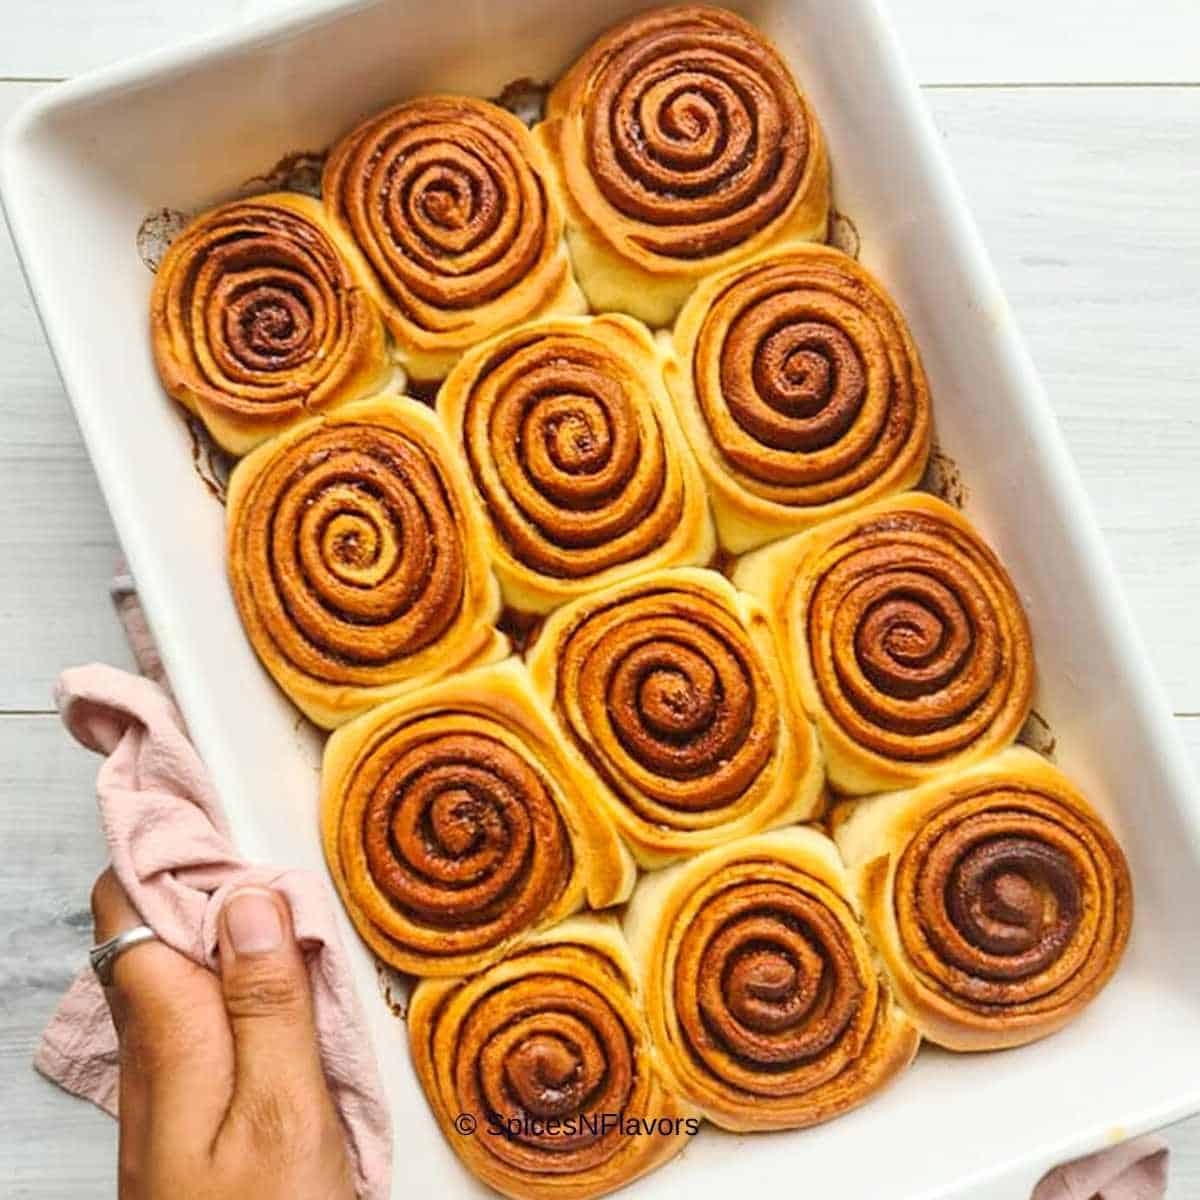 Cinnamon Roll Recipe Without Eggs: Step by Step Guide  